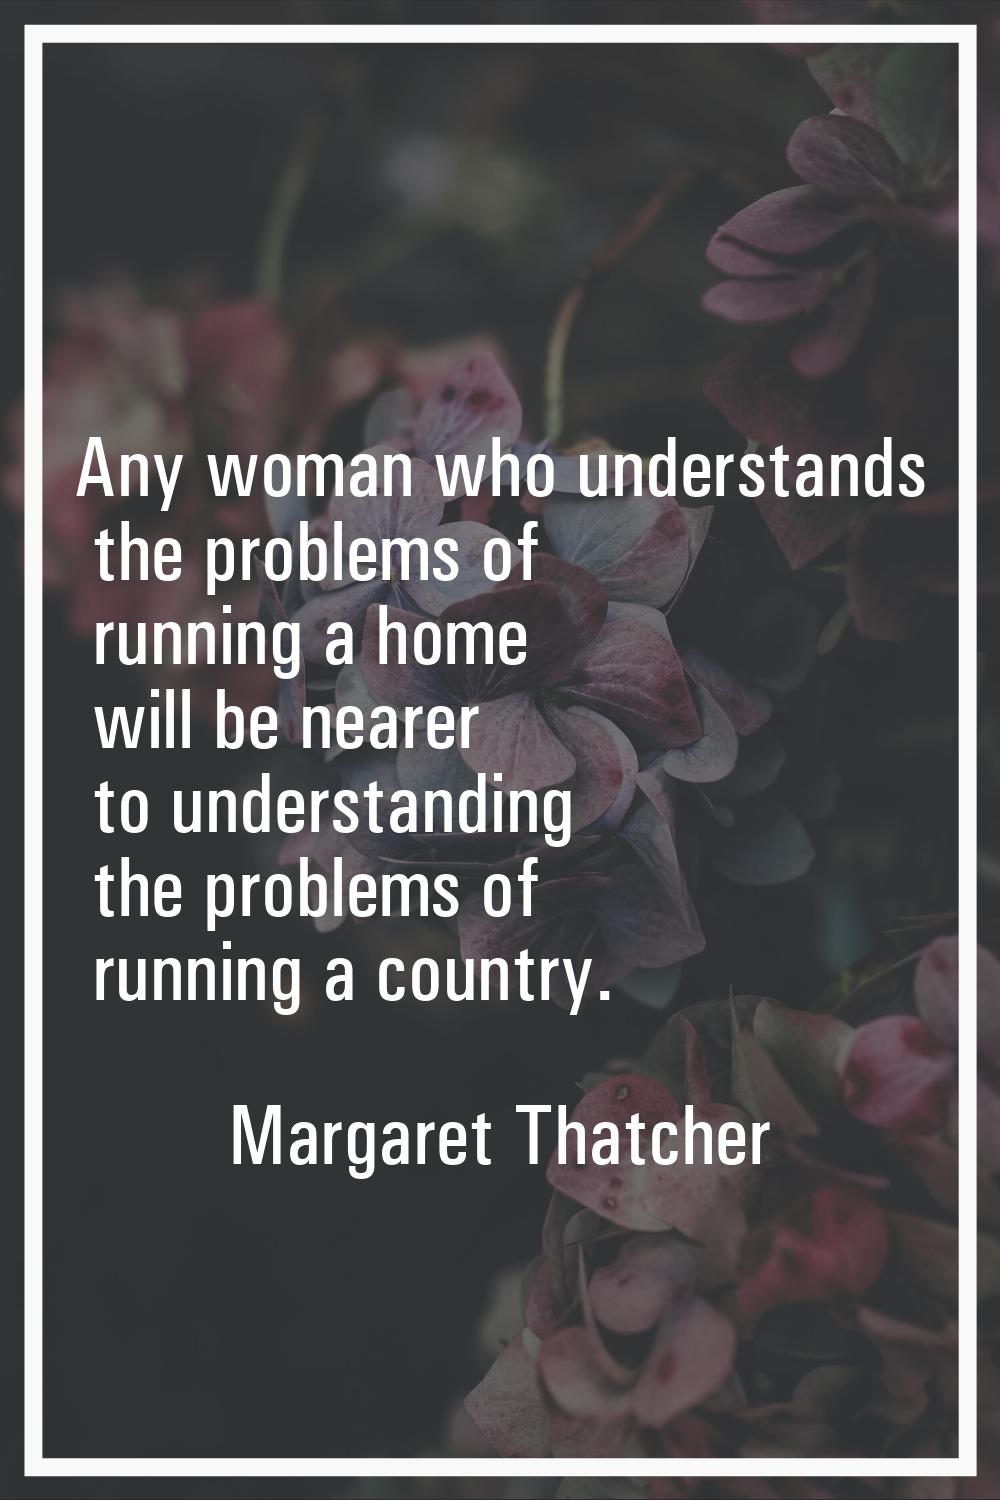 Any woman who understands the problems of running a home will be nearer to understanding the proble